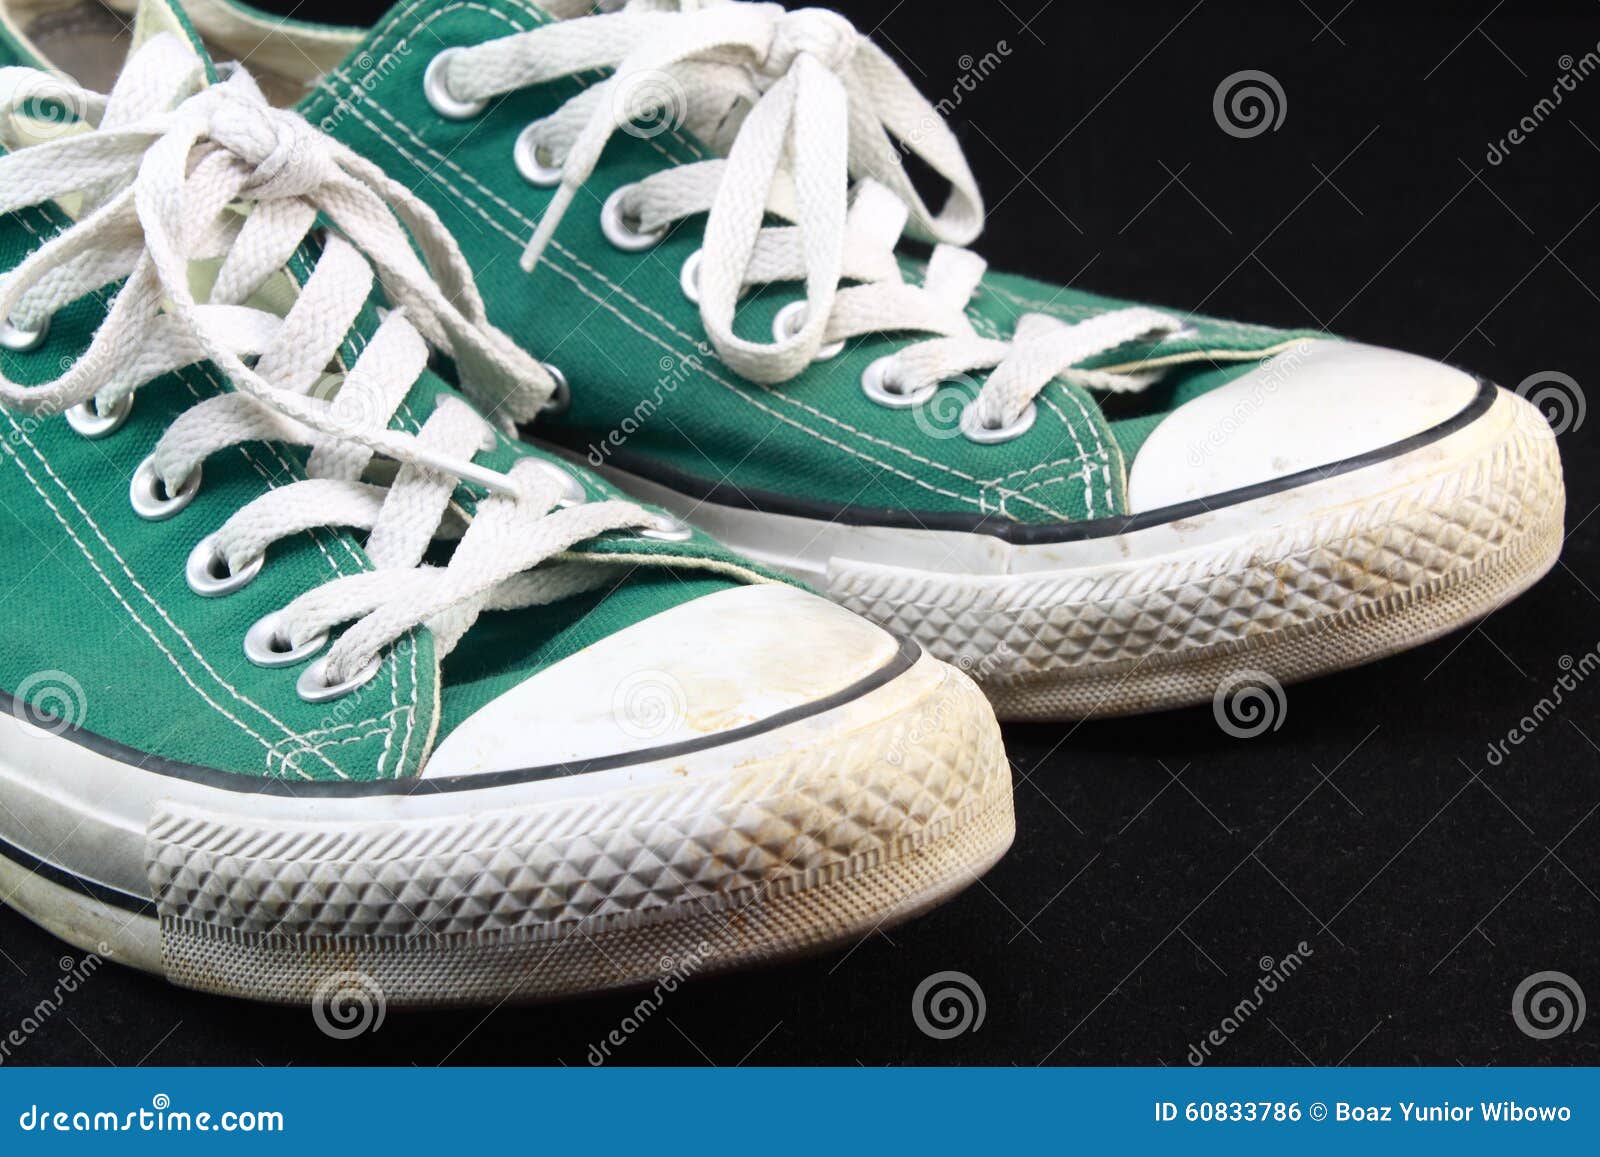 Classic Green Sneaker stock photo. Image of green, plimsoll - 60833786